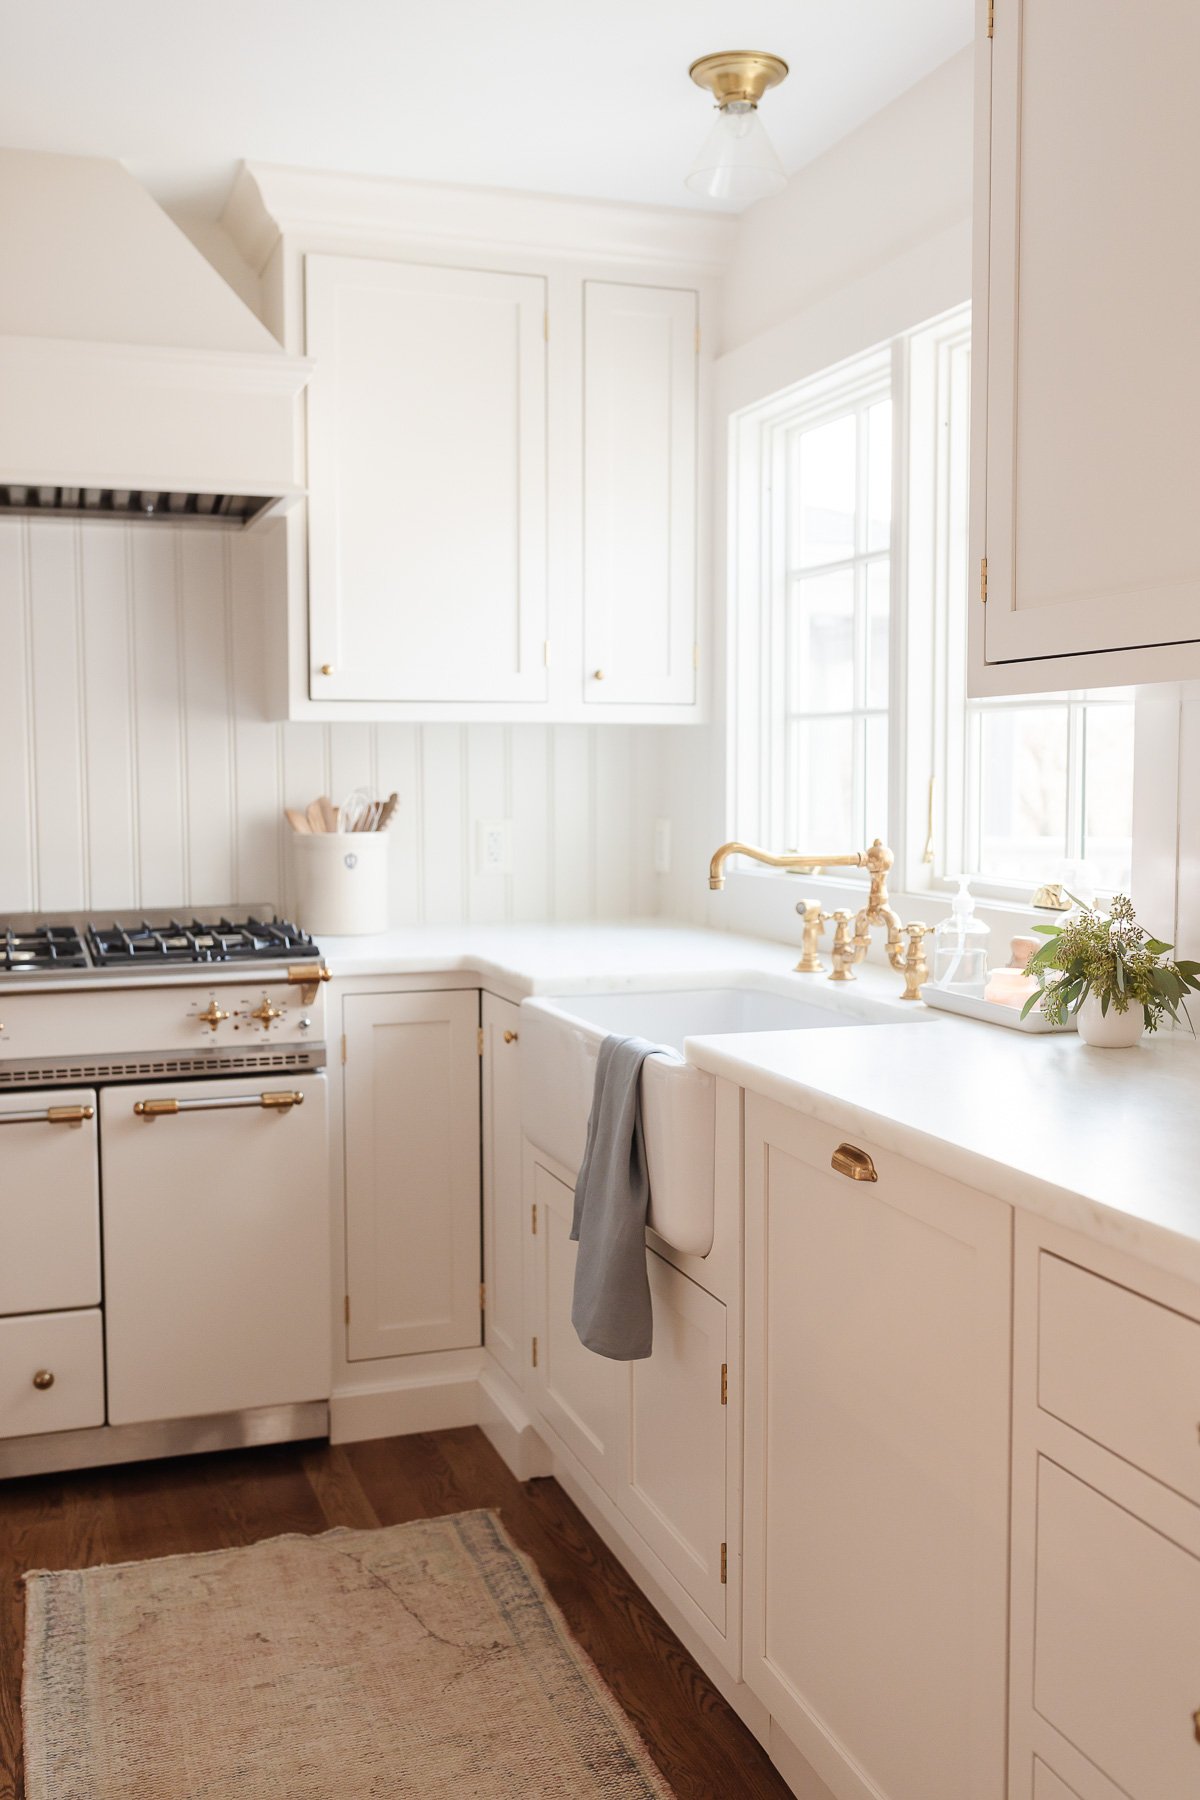 Do White Shaker Cabinets Look Cheap